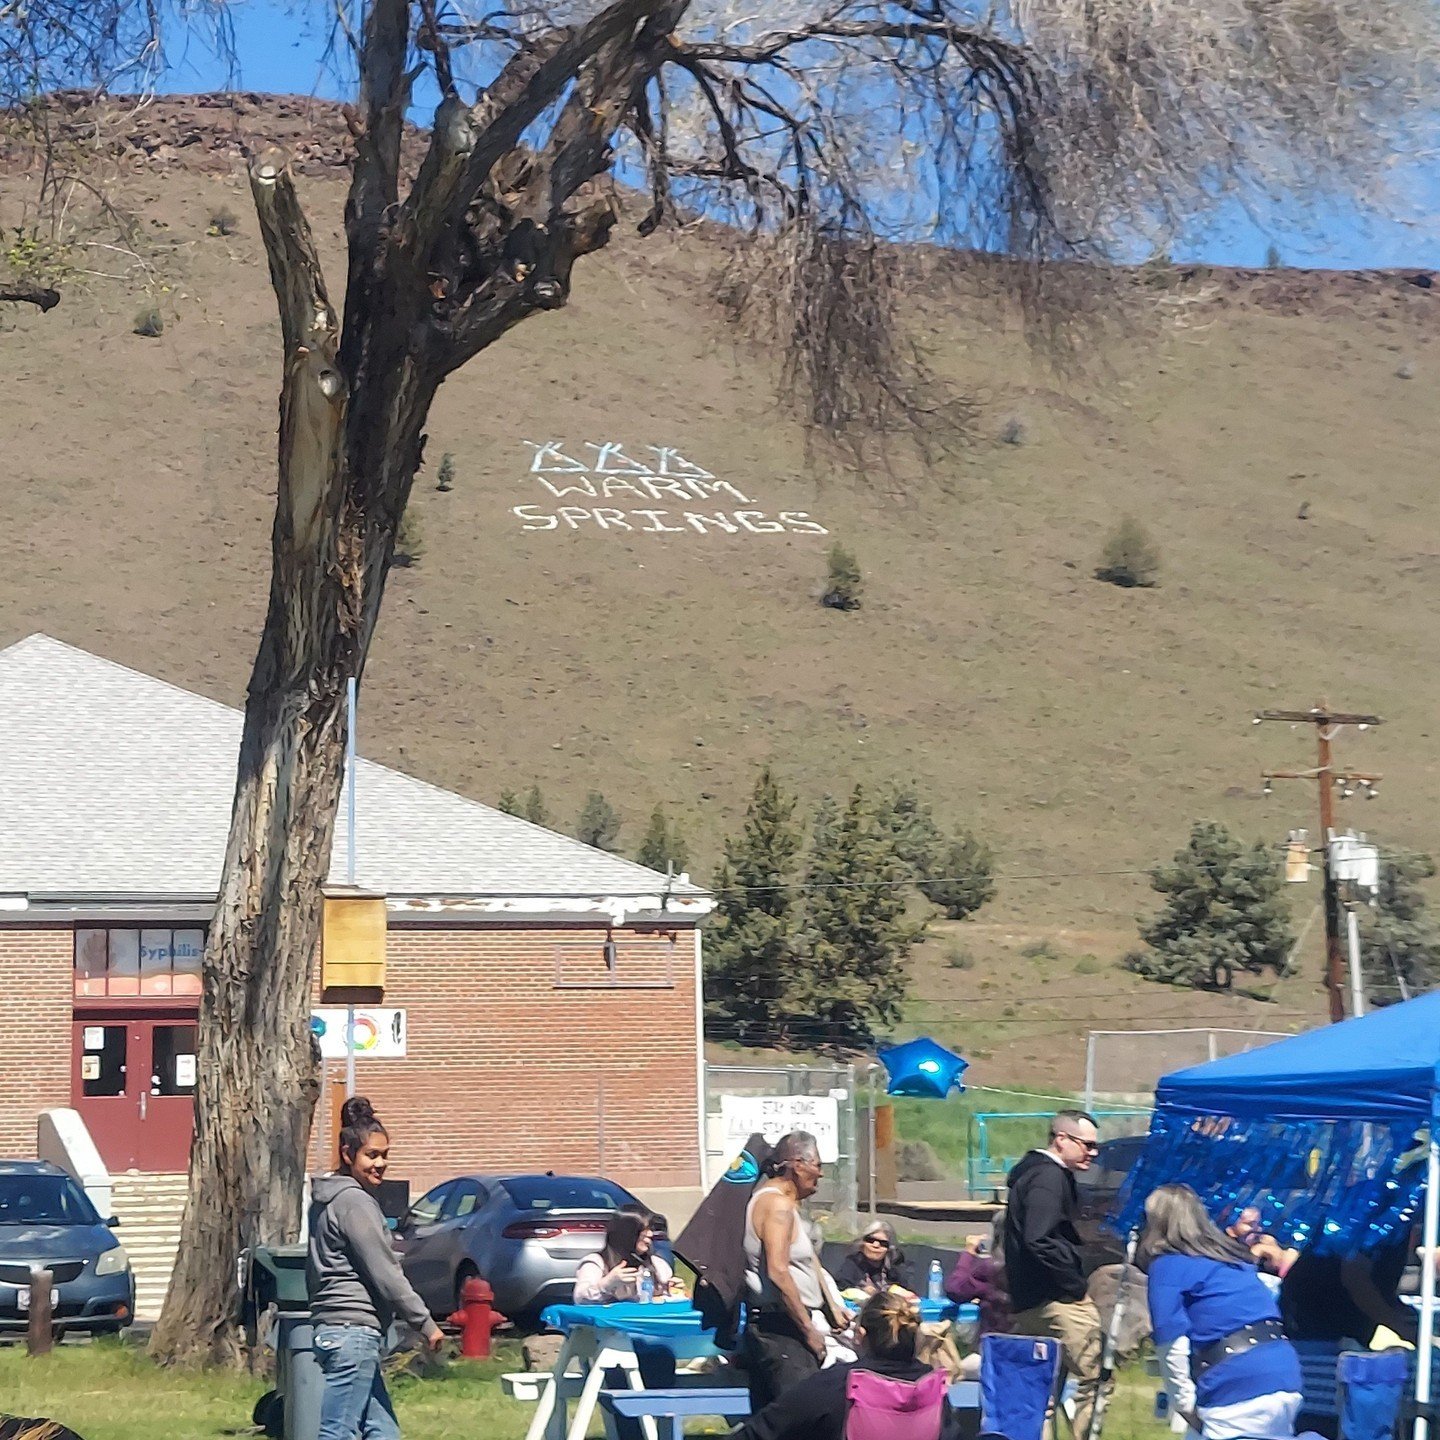 Last week, we joined the people of Warm Springs to celebrate National Child Abuse &amp; Neglect Prevention Month. We enjoyed a meal out on the green lawn, heard from speakers, and took part in a round dance (our first!)⁠
⁠
This event was organized by